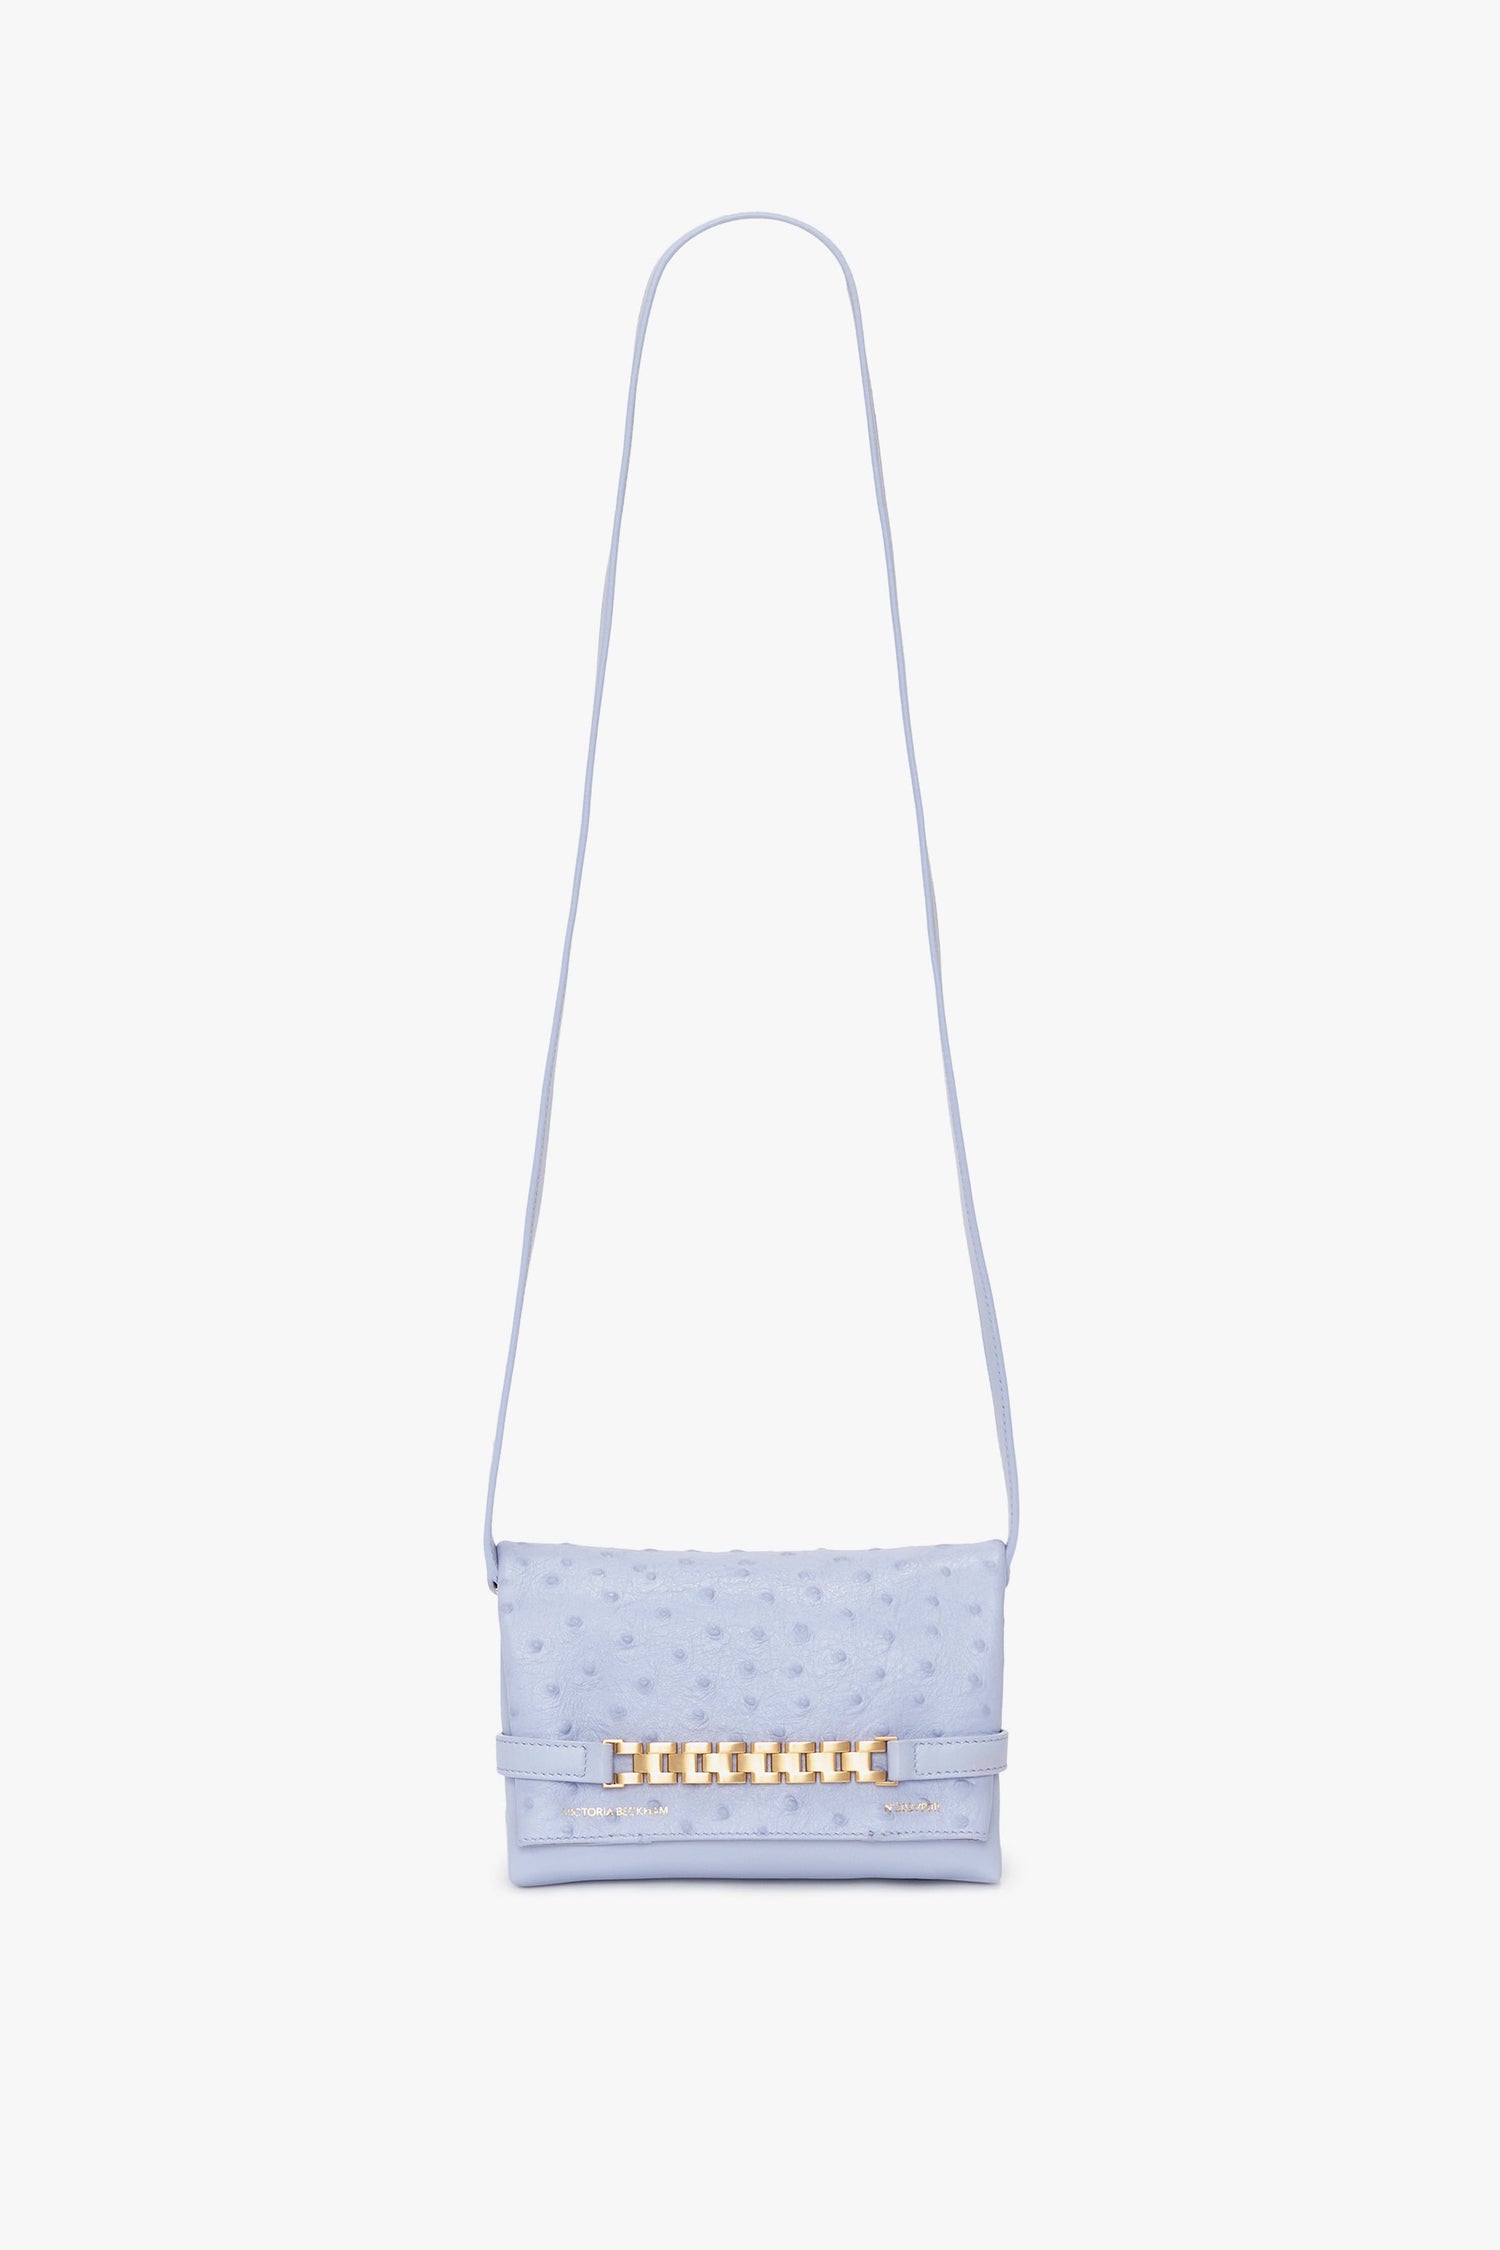 Light blue Mini Chain Pouch Bag With Long Strap In Frost Ostrich-Effect Leather by Victoria Beckham with a gold chain detail on the front.